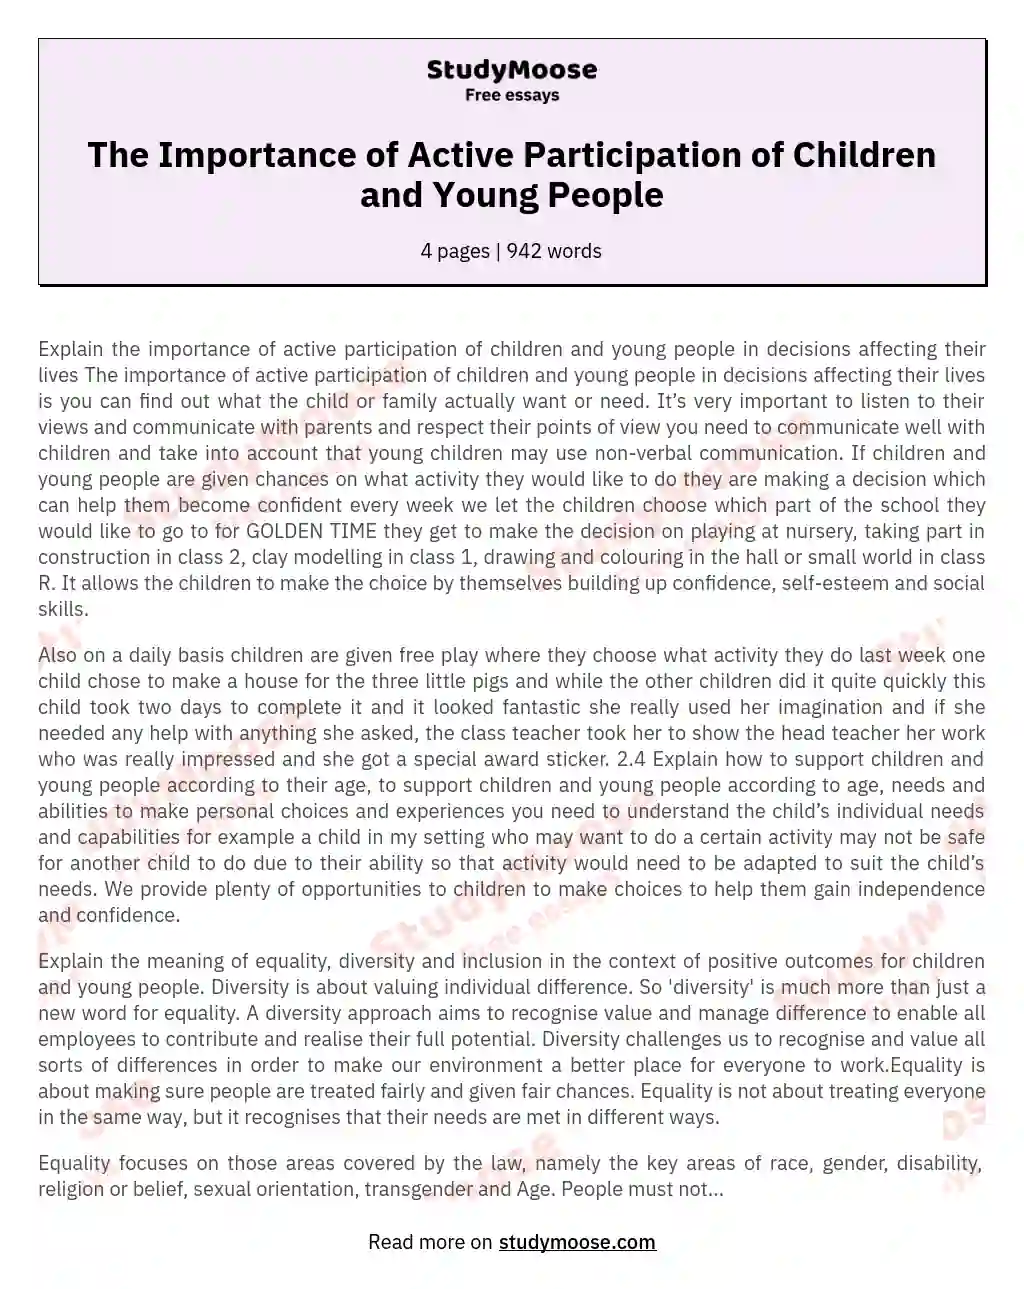 The Importance of Active Participation of Children and Young People essay